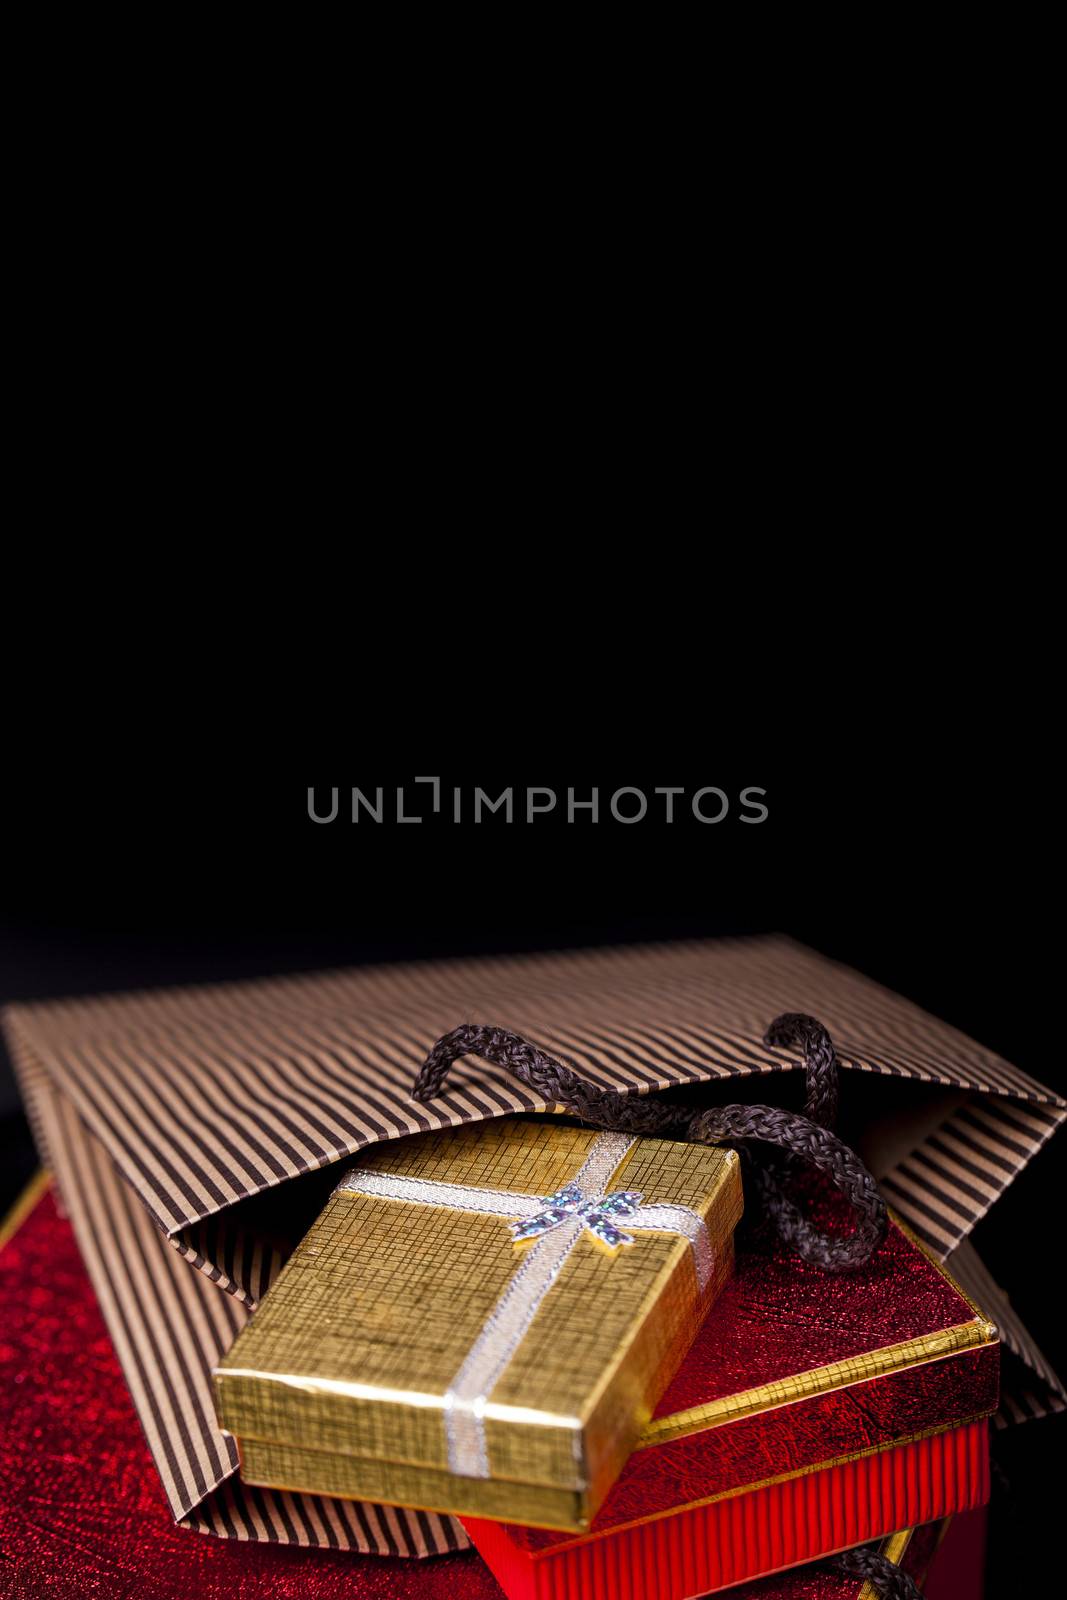 Gift Box and Champagne
Romantic view
Useful in any kind of valentines day, birthday, new Year celebration or any romantic emotional mood concepts.